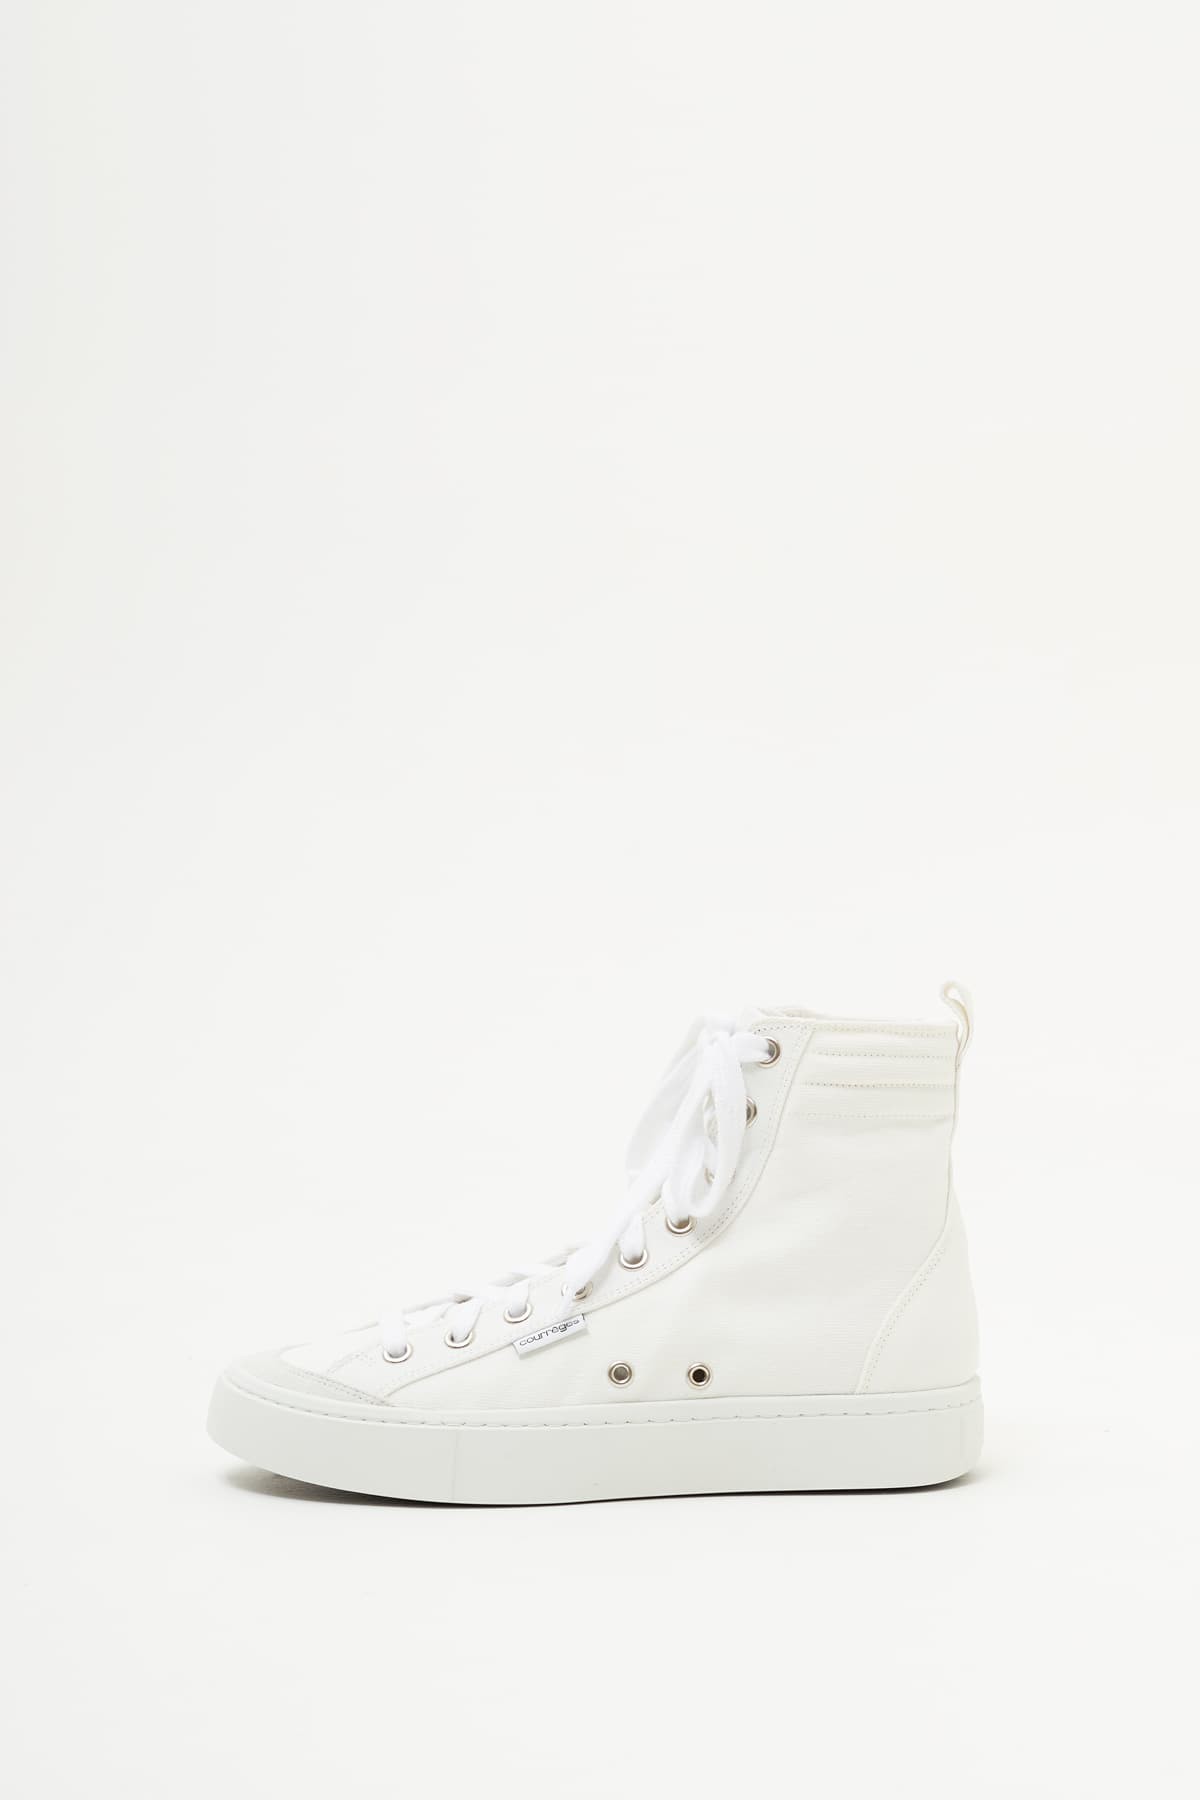 COURREGES HERITAGE WHITE CANVAS 01 SNEAKERS IAMNUE